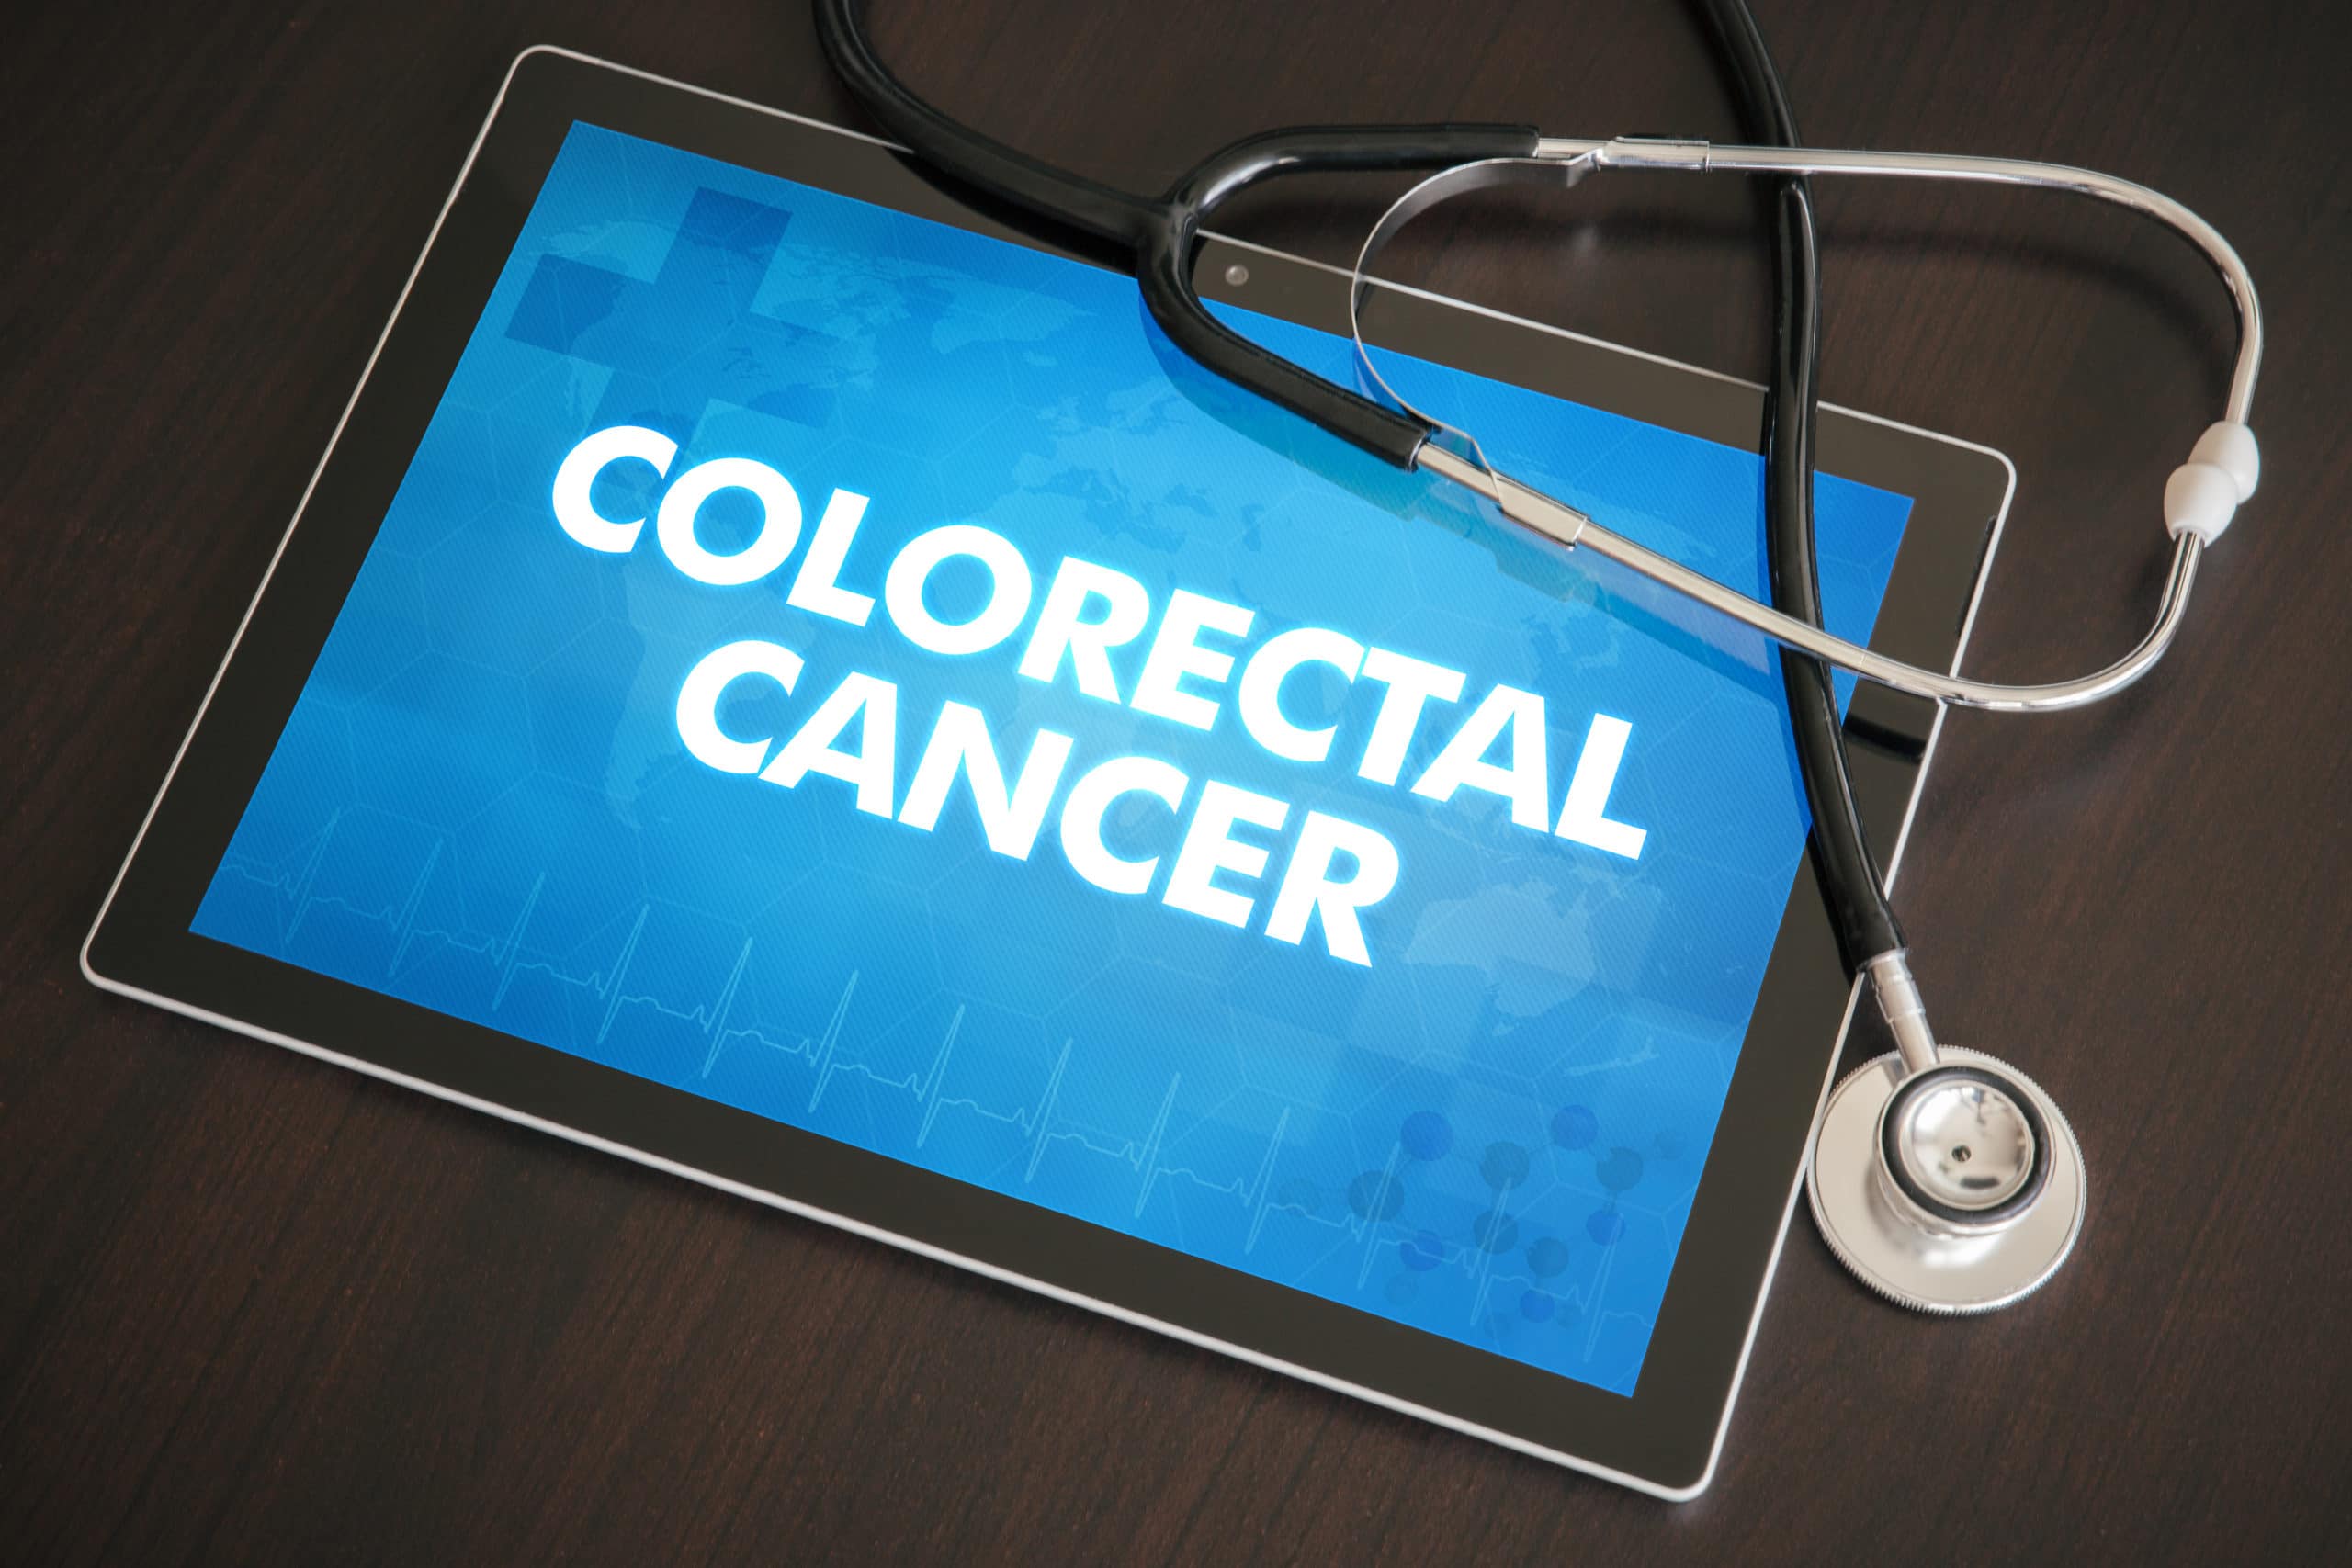 Colorectal cancer (gastrointestinal disease) diagnosis medical concept on tablet screen with stethoscope.